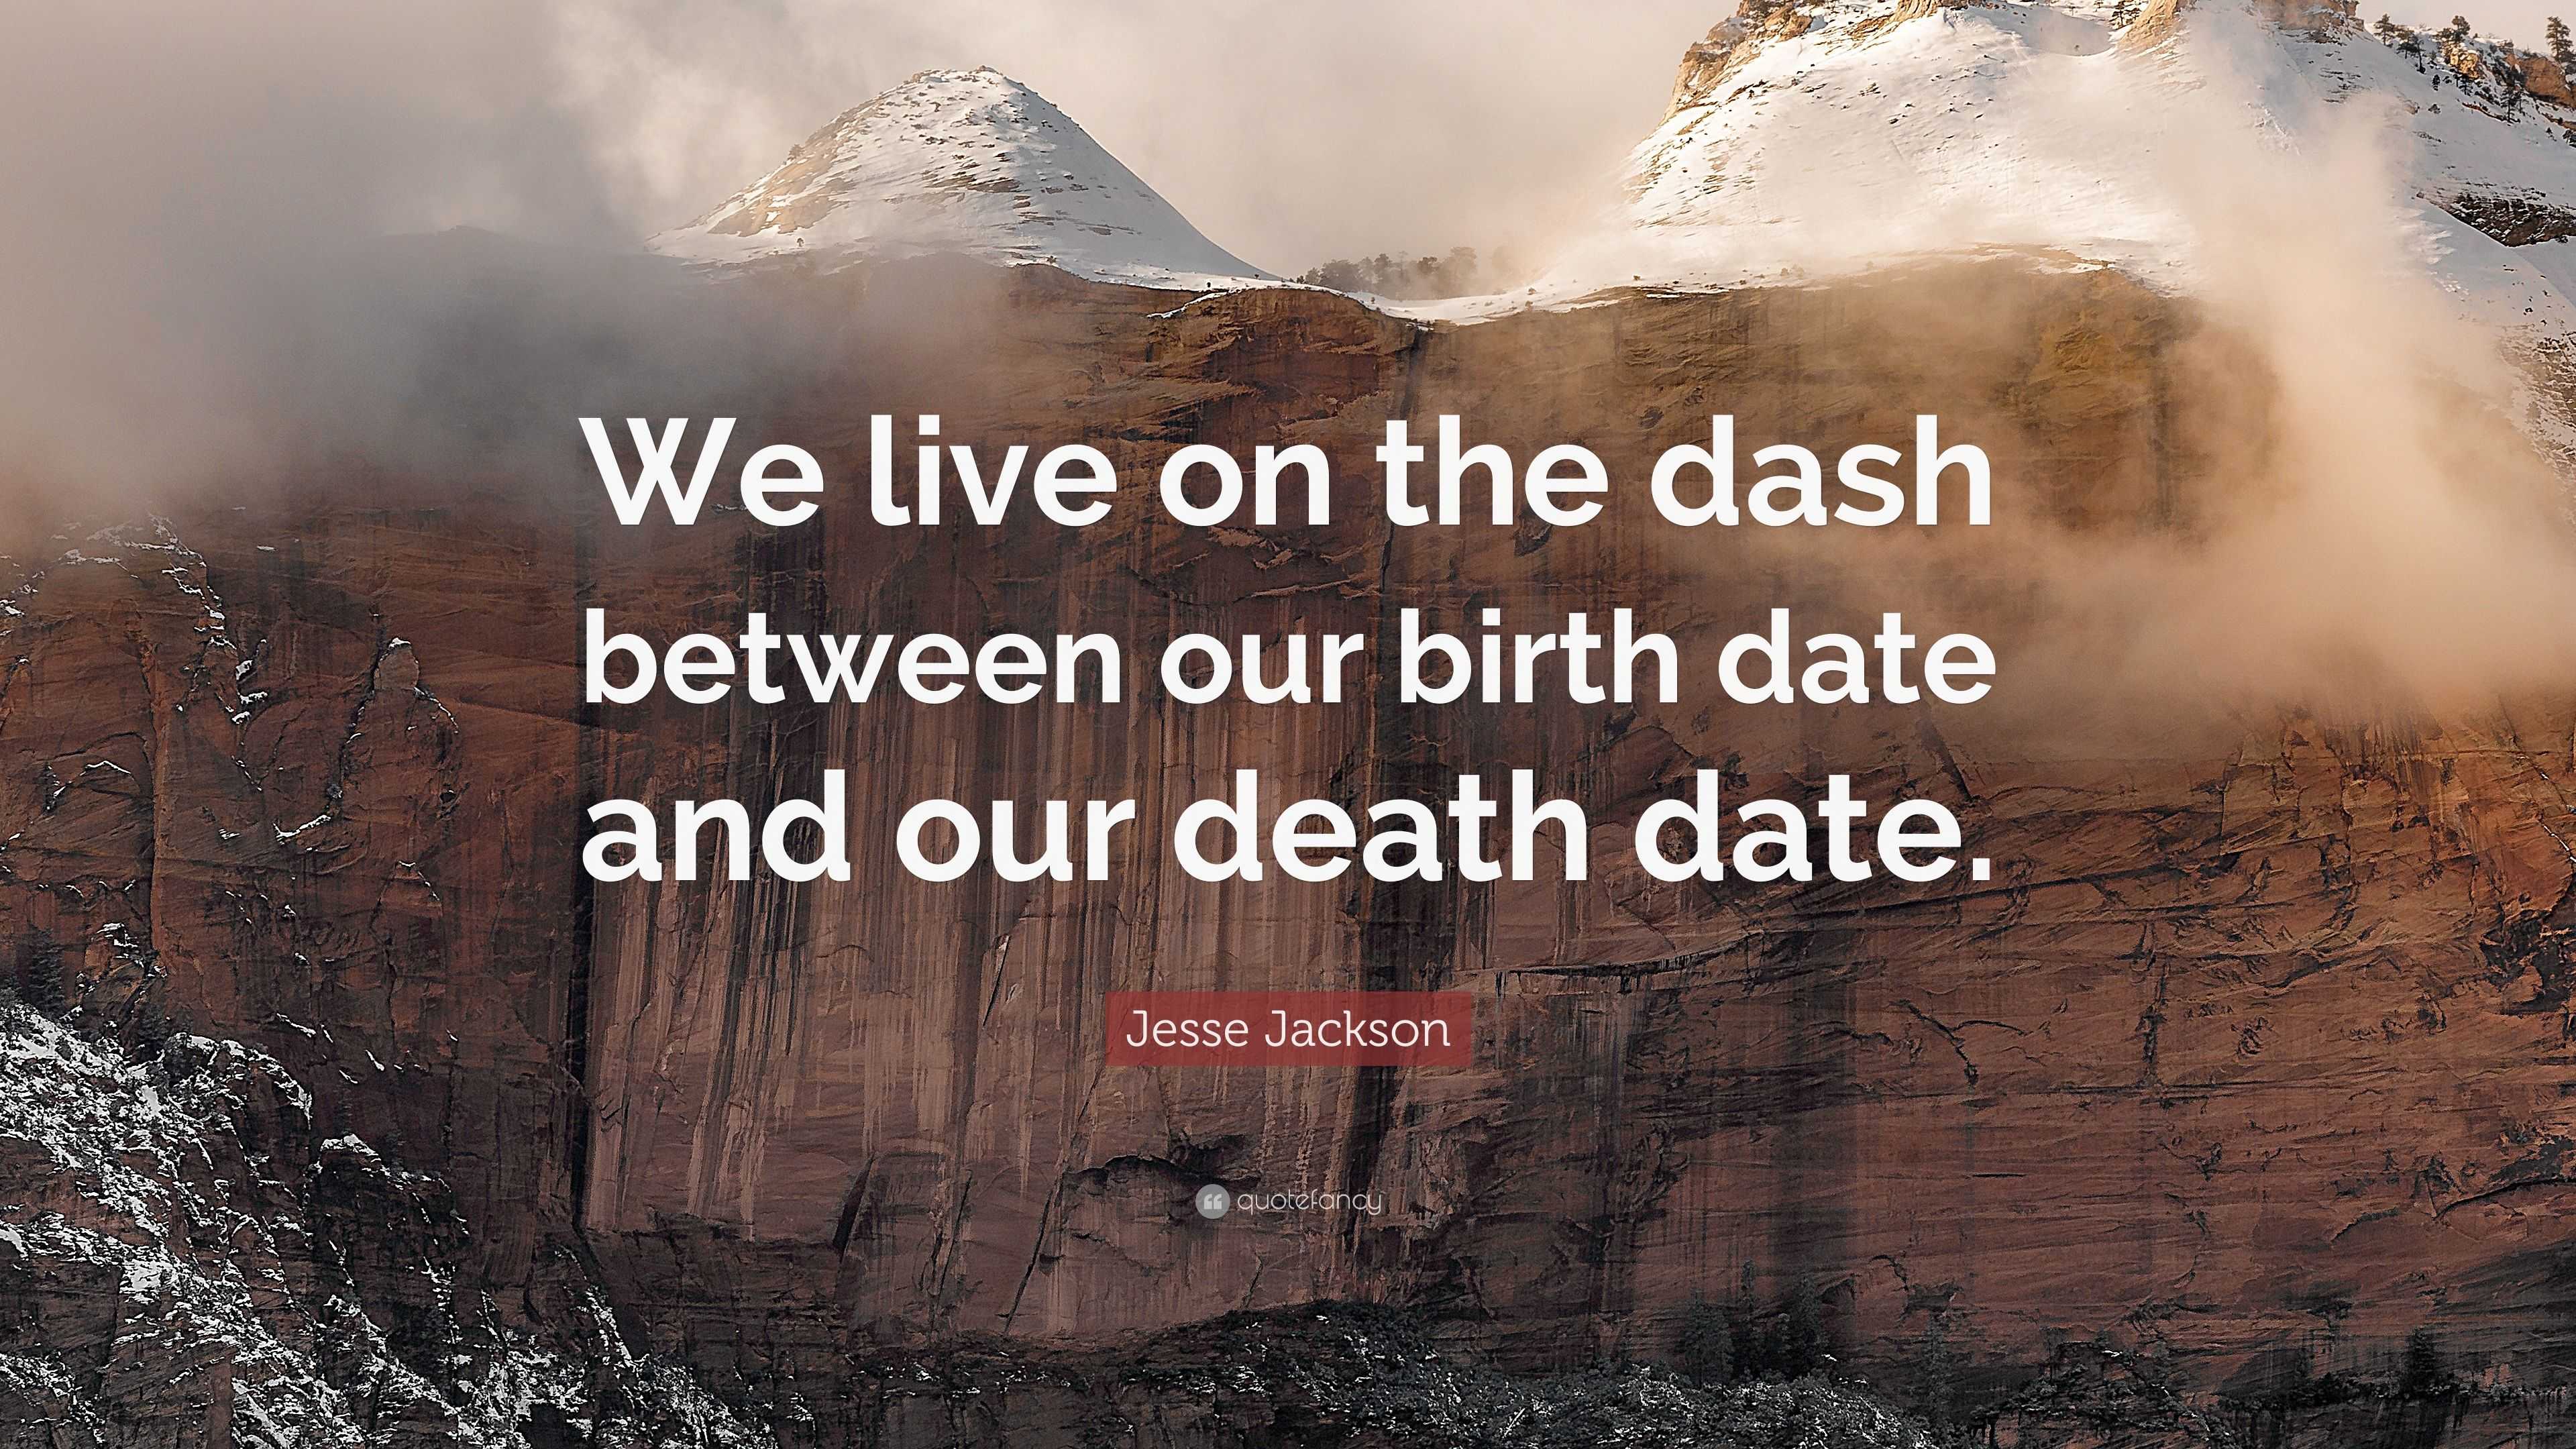 Jesse Jackson Quote We Live On The Dash Between Our Birth Date And Our Death Date